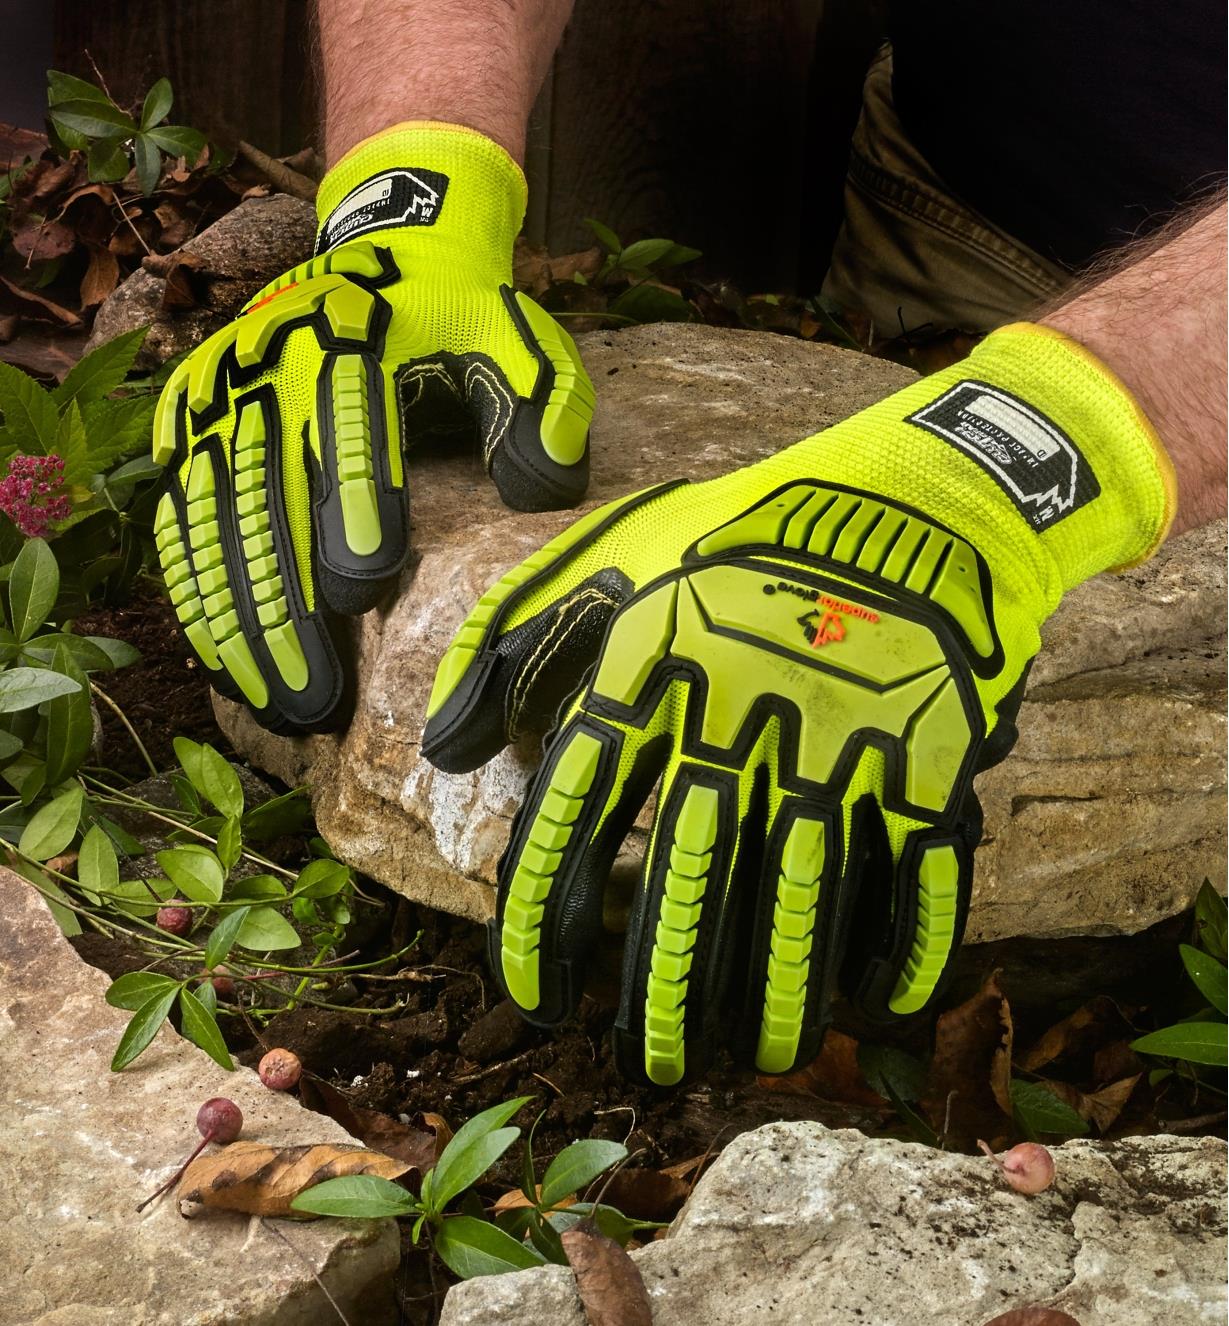 A landscaper wears impact-resistant gloves while positioning a large rock in a garden